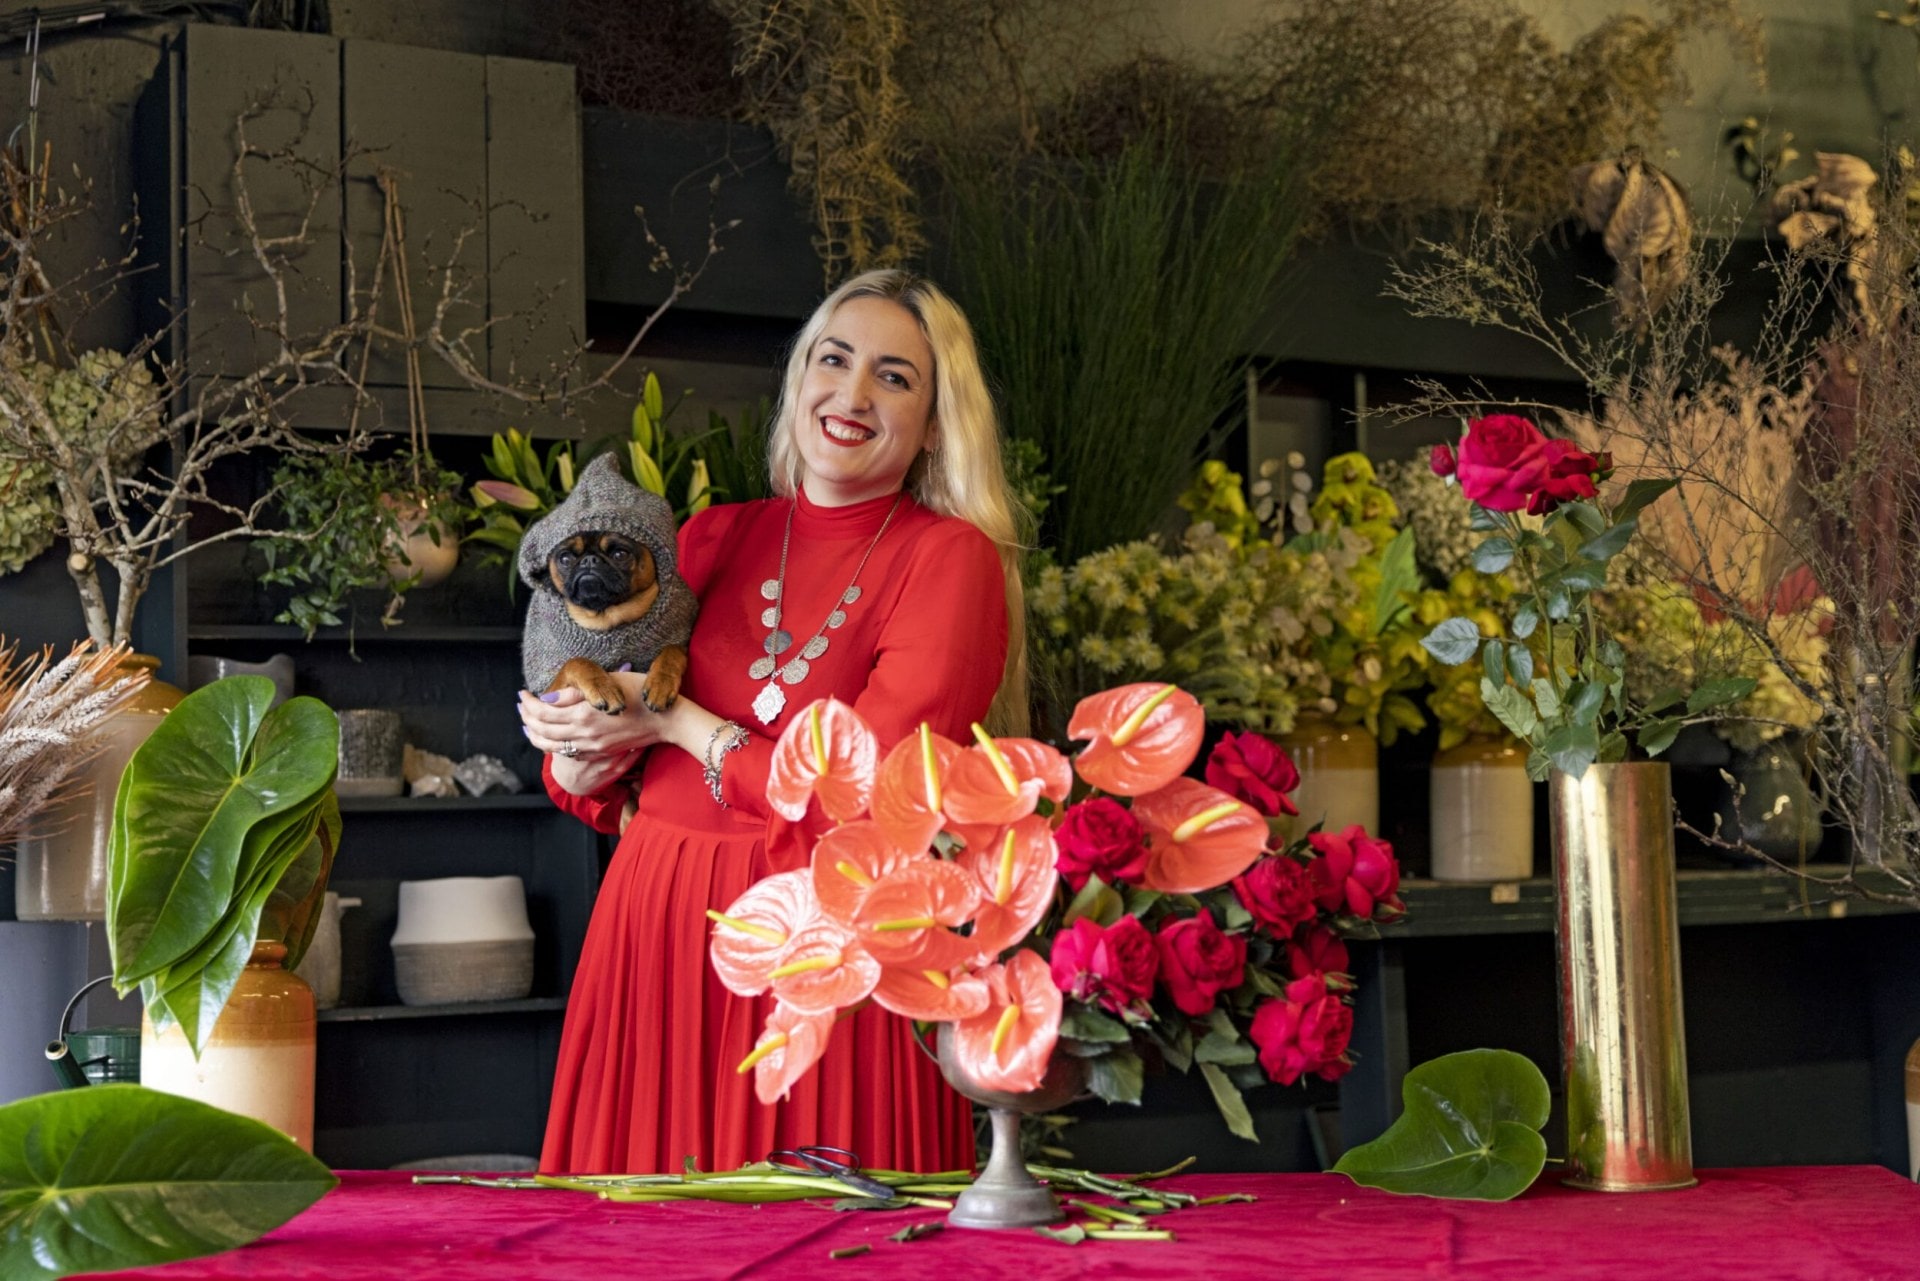 Georgie Malyon holding her dog Roky standing in front of a red table with a floral arrangement